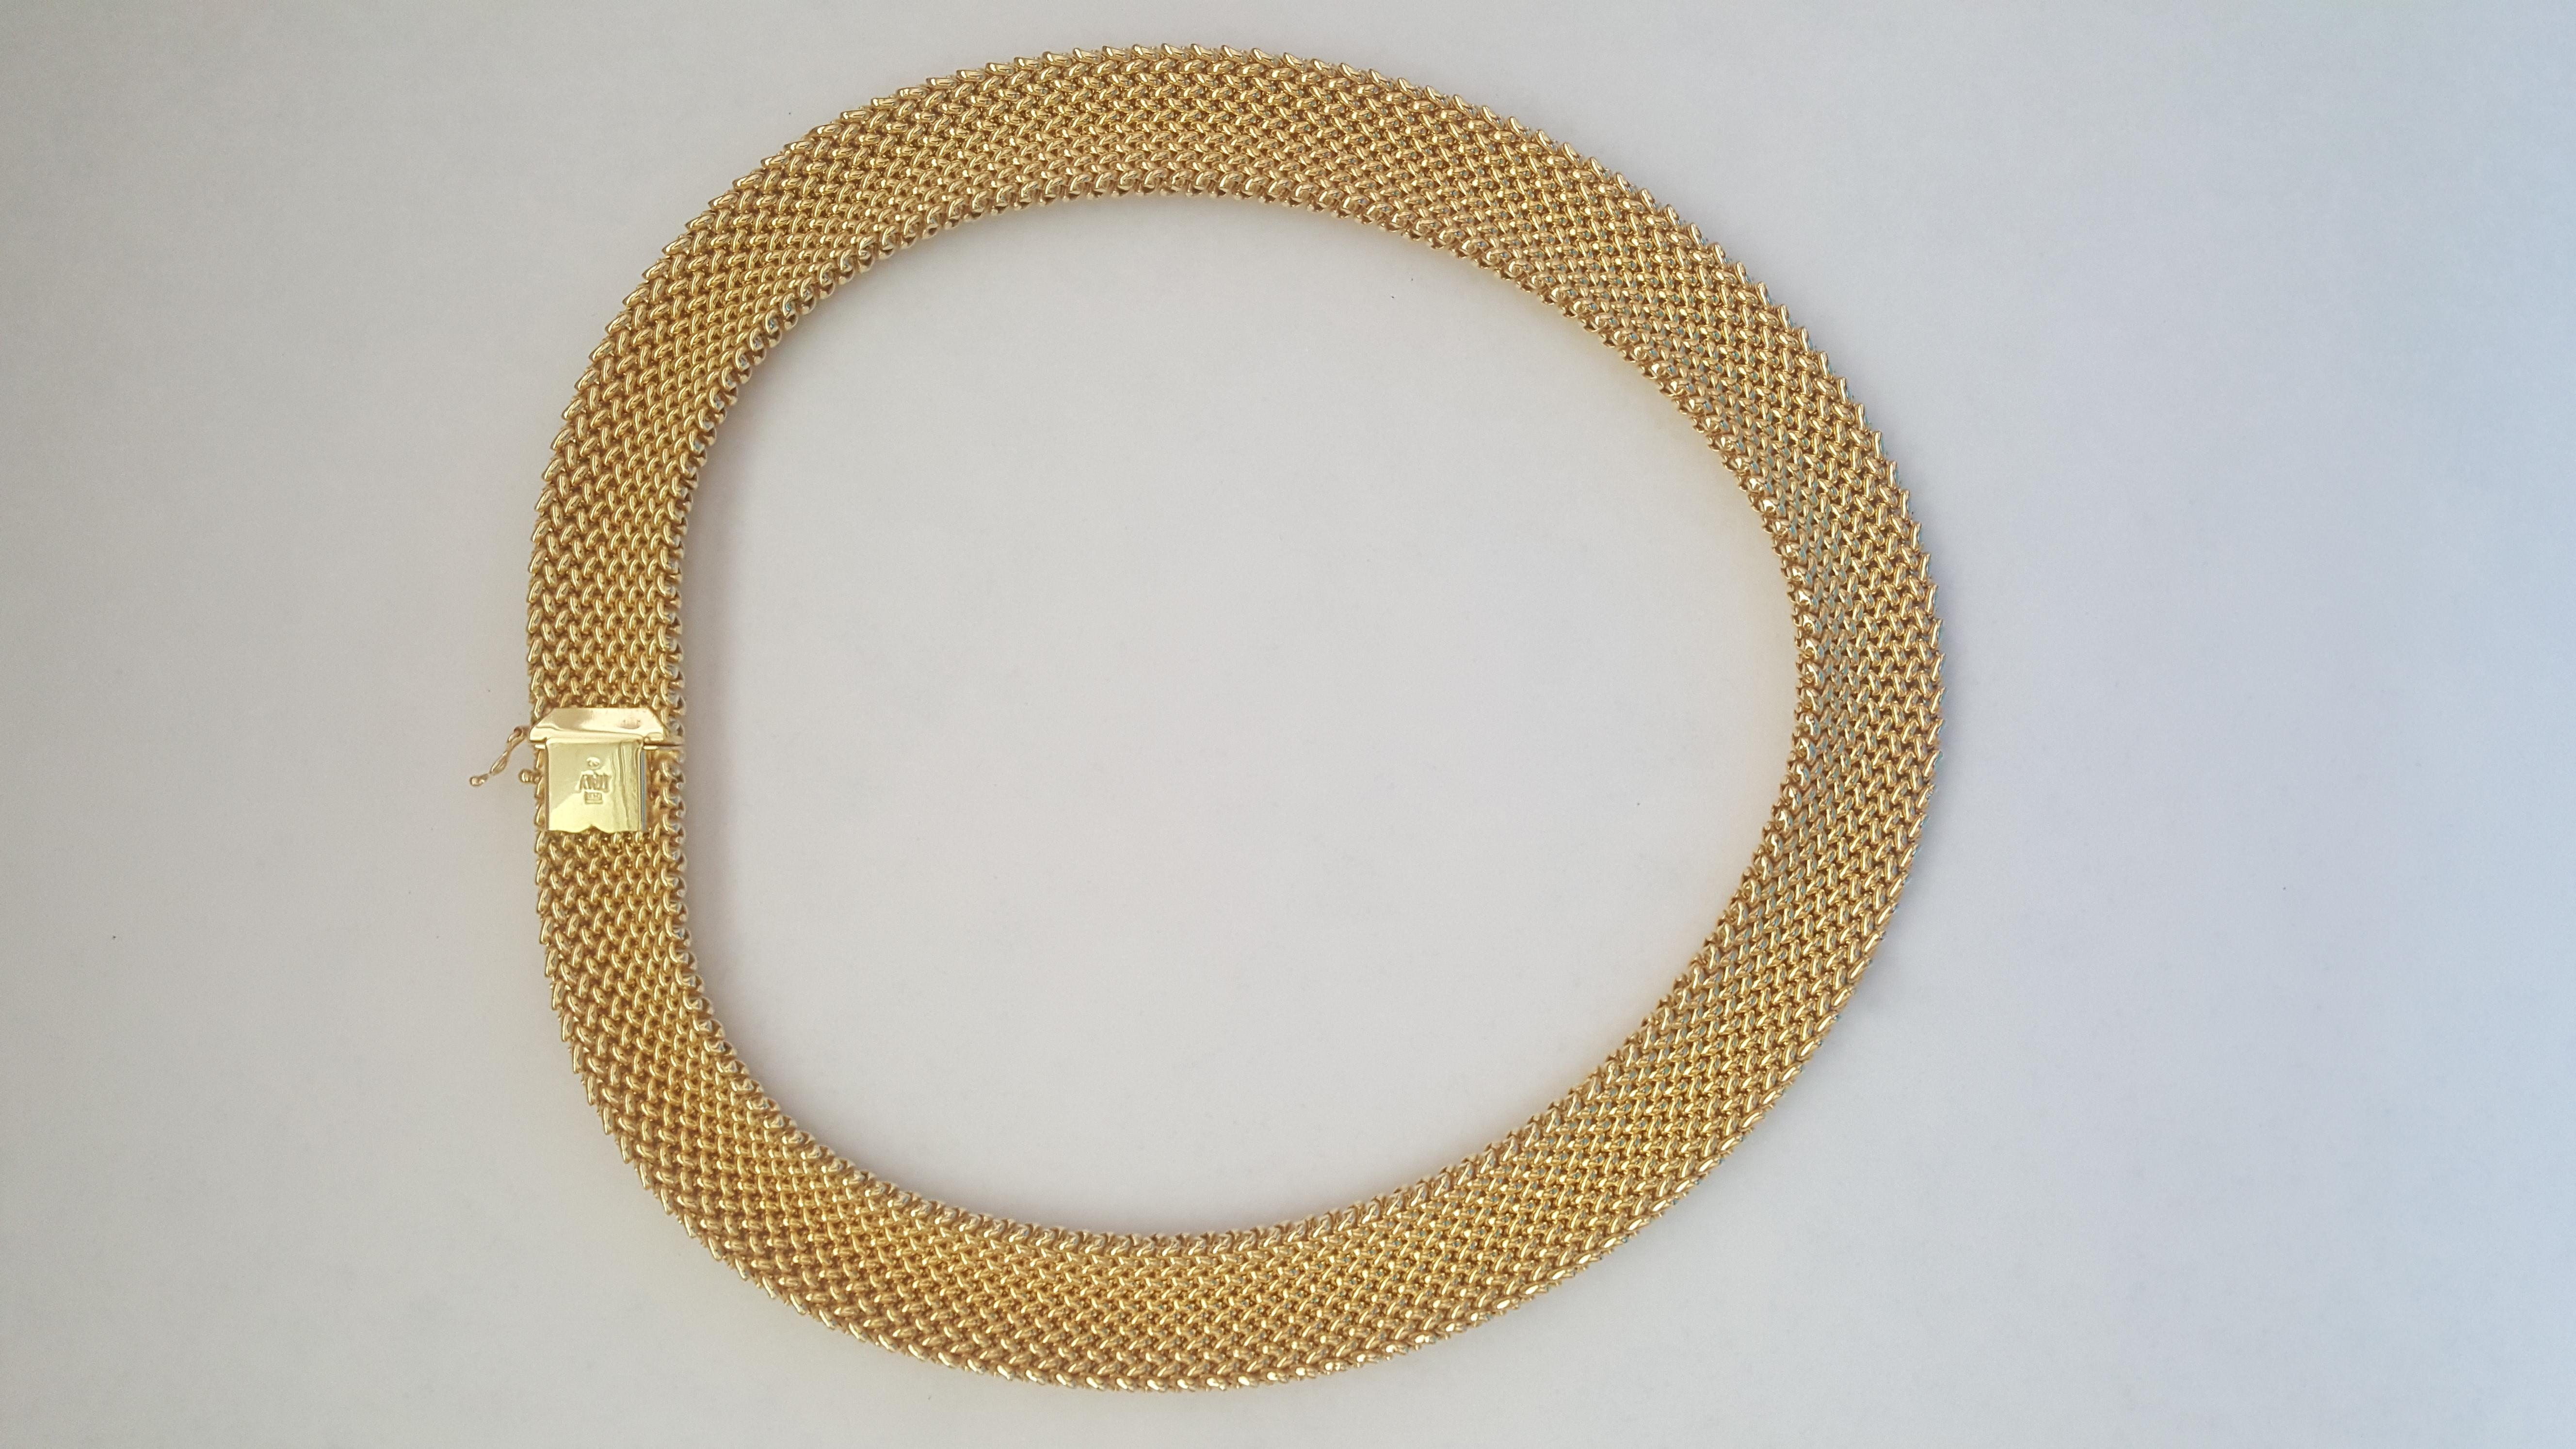 Modern 14 Karat Yellow Gold Omega Style Necklace with a Mesh Design